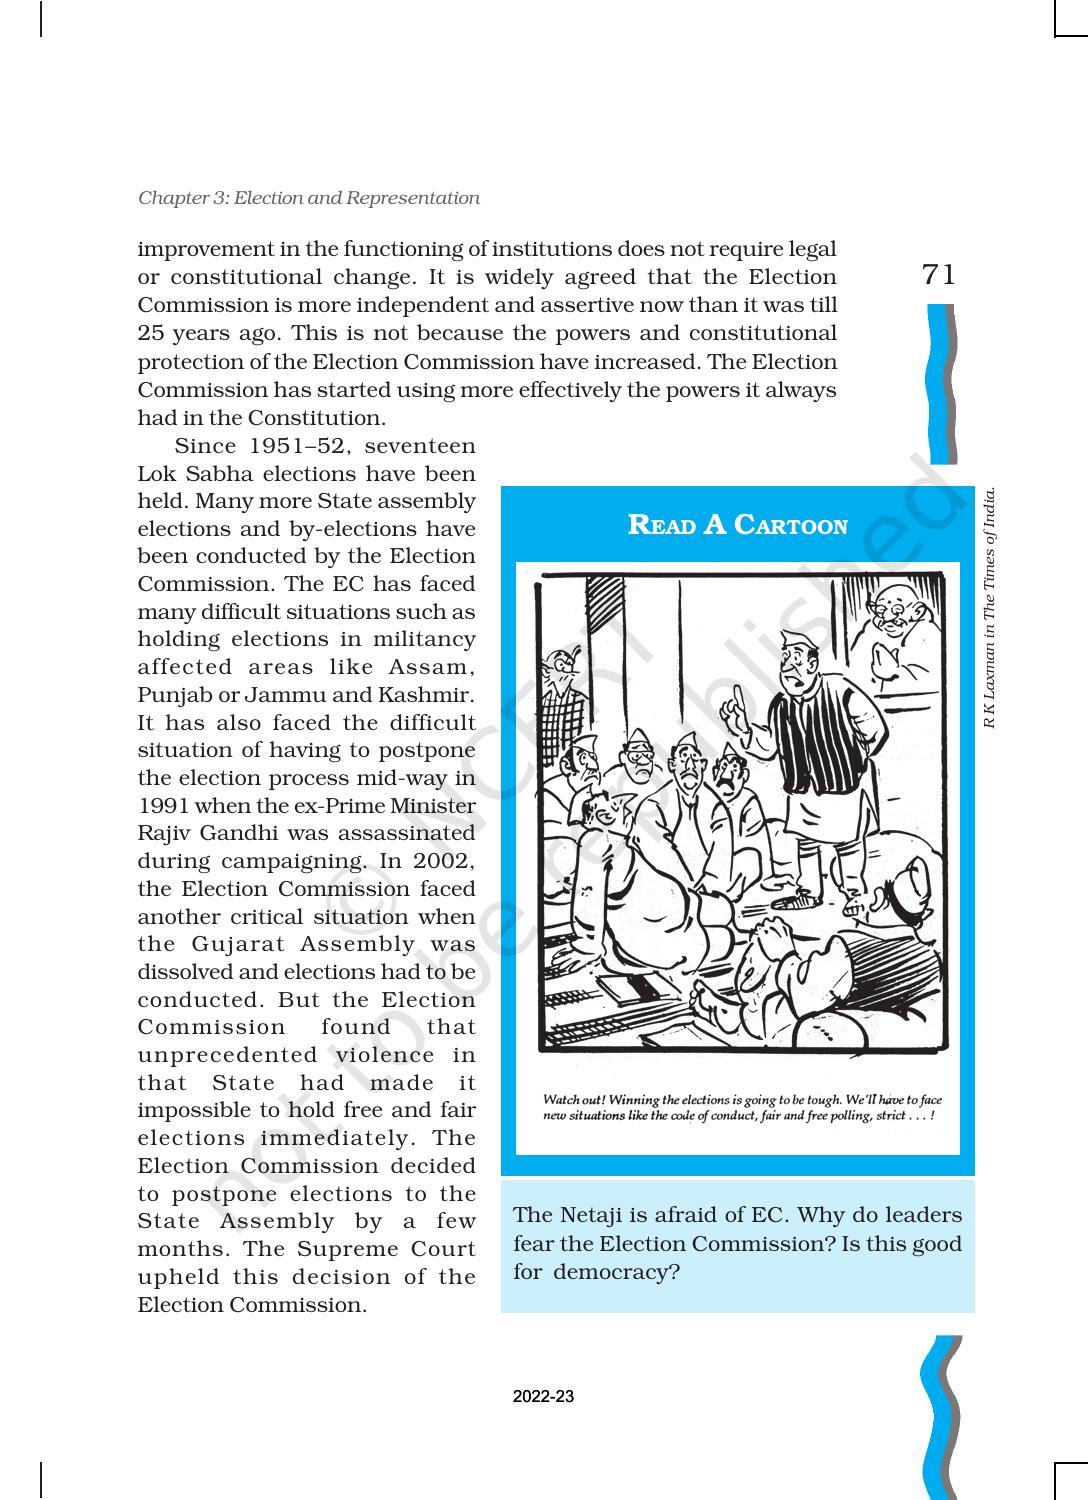 NCERT Book for Class 11 Political Science (Indian Constitution at Work) Chapter 3 Election and Representation - Page 21